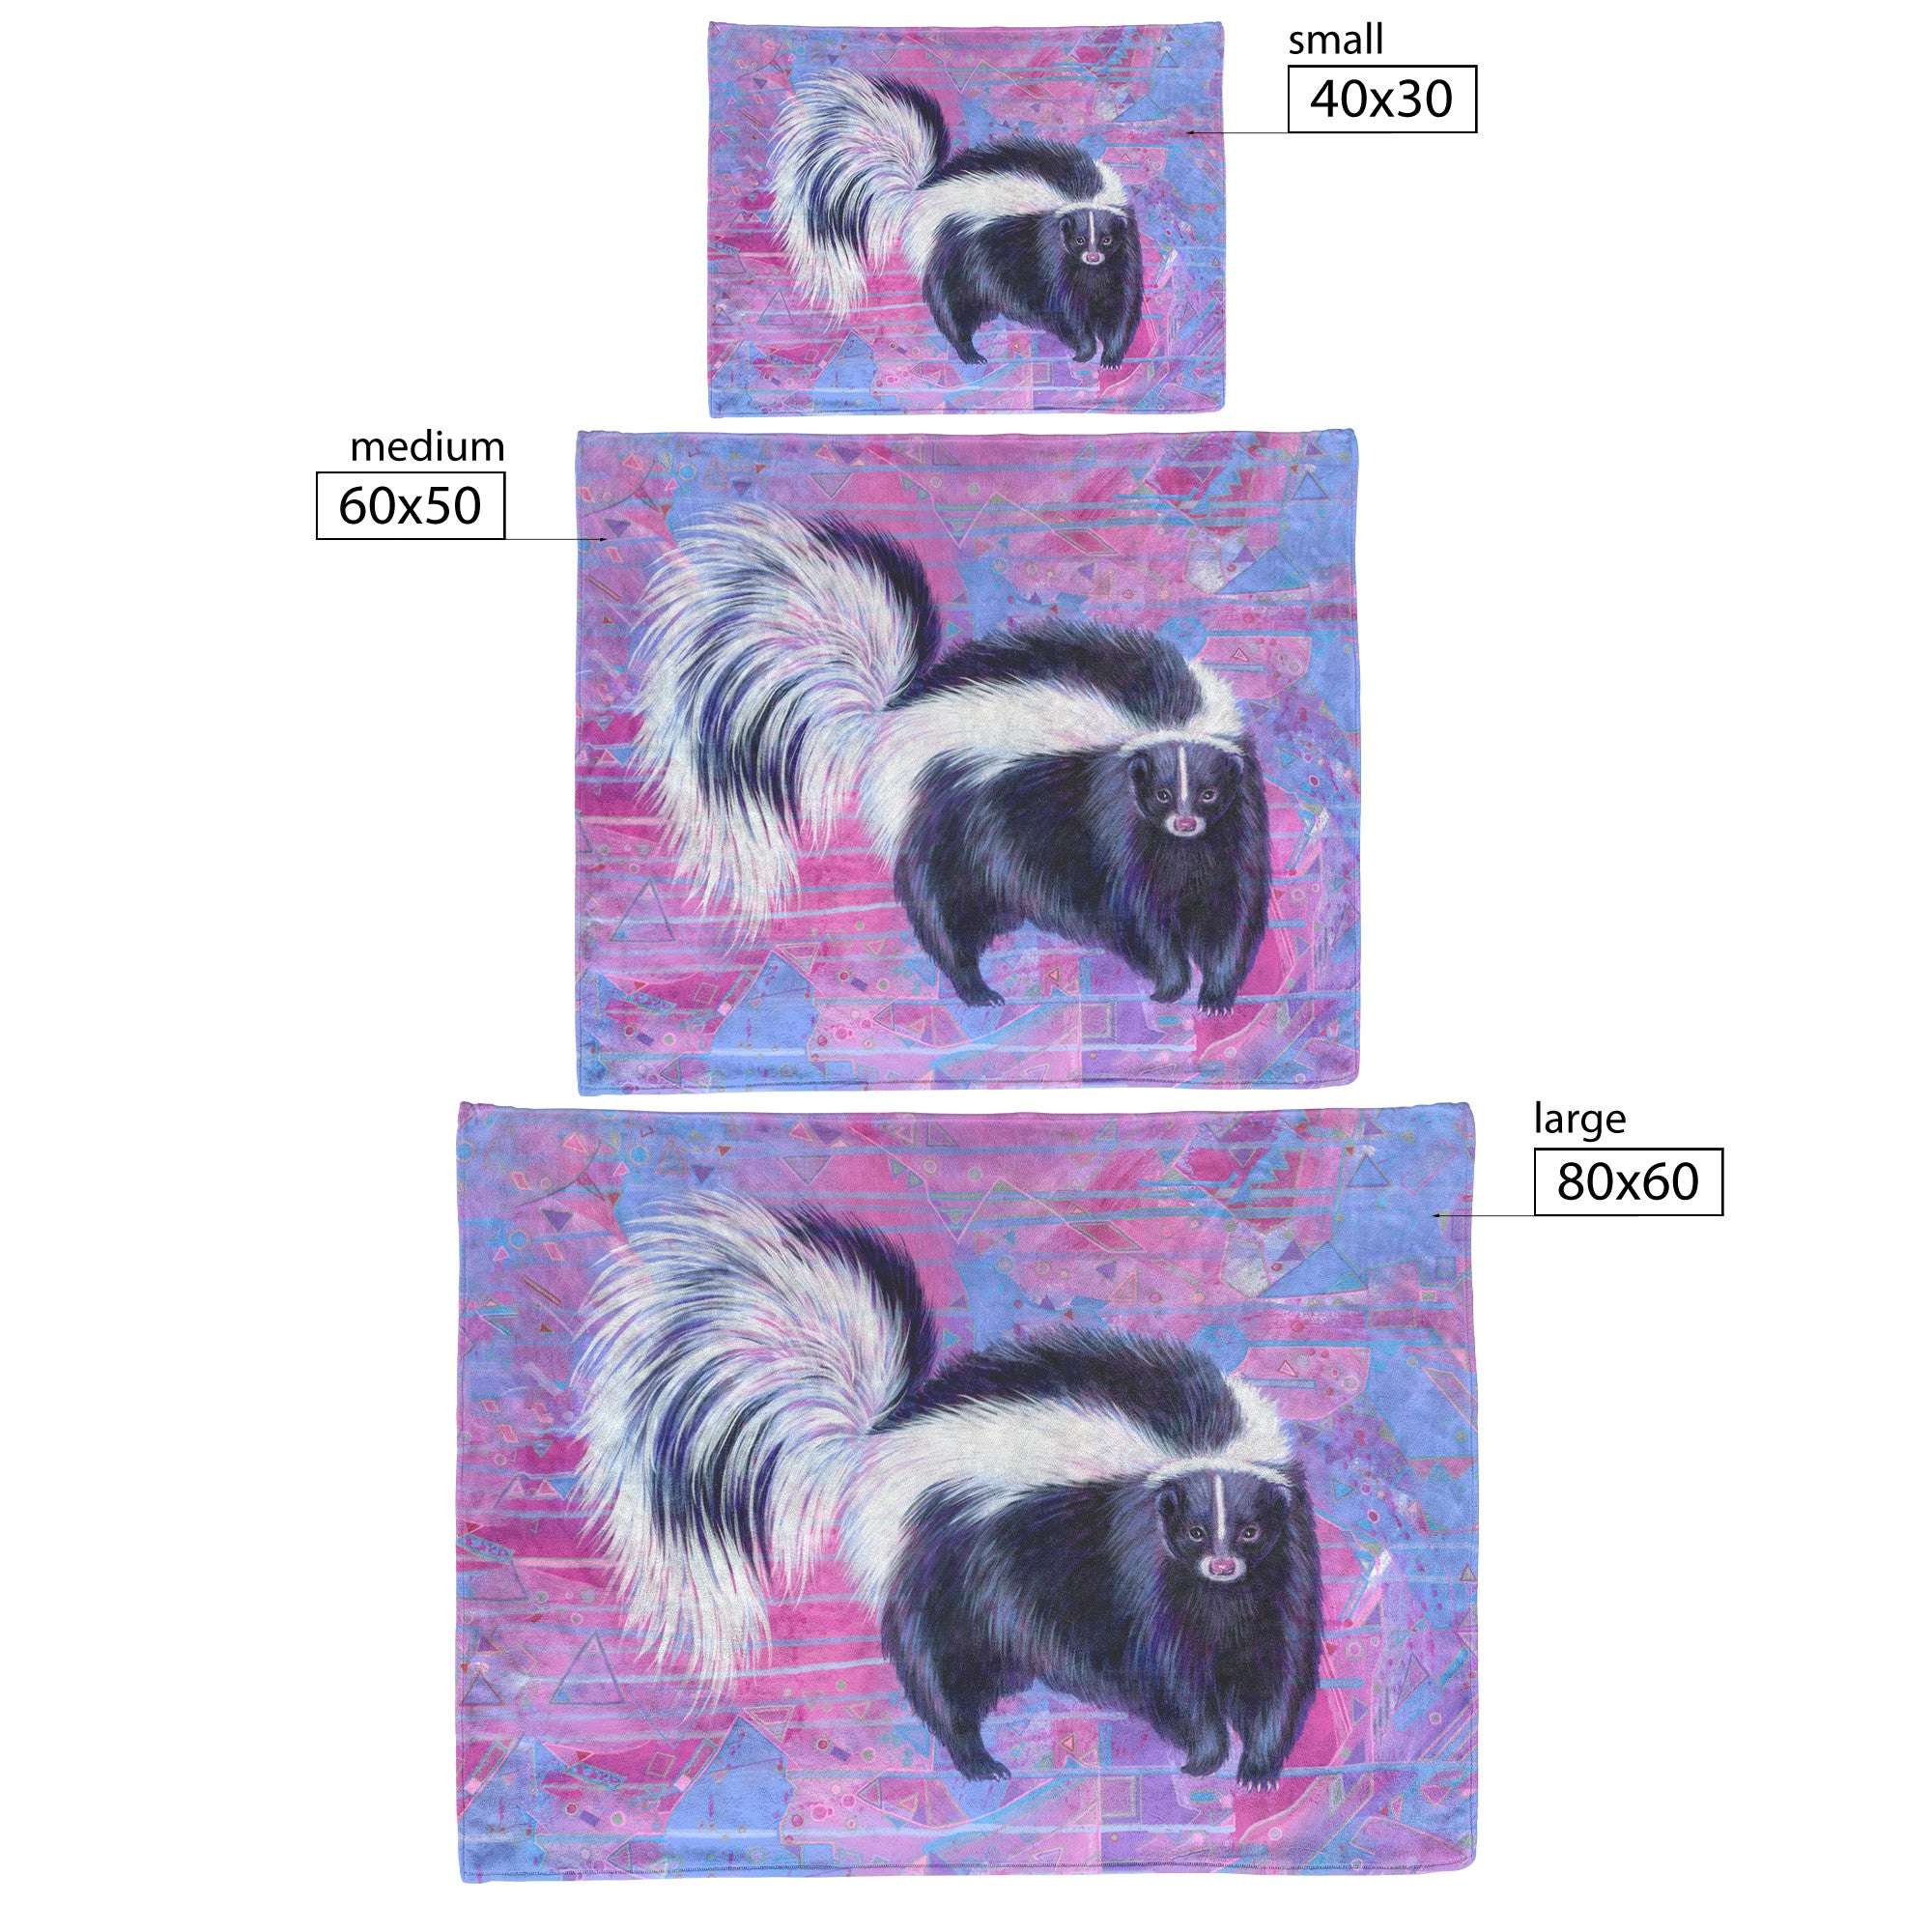 Three Skunk Blankets of a skunk on purple and pink abstract backgrounds, in descending sizes labeled small, medium, and large.